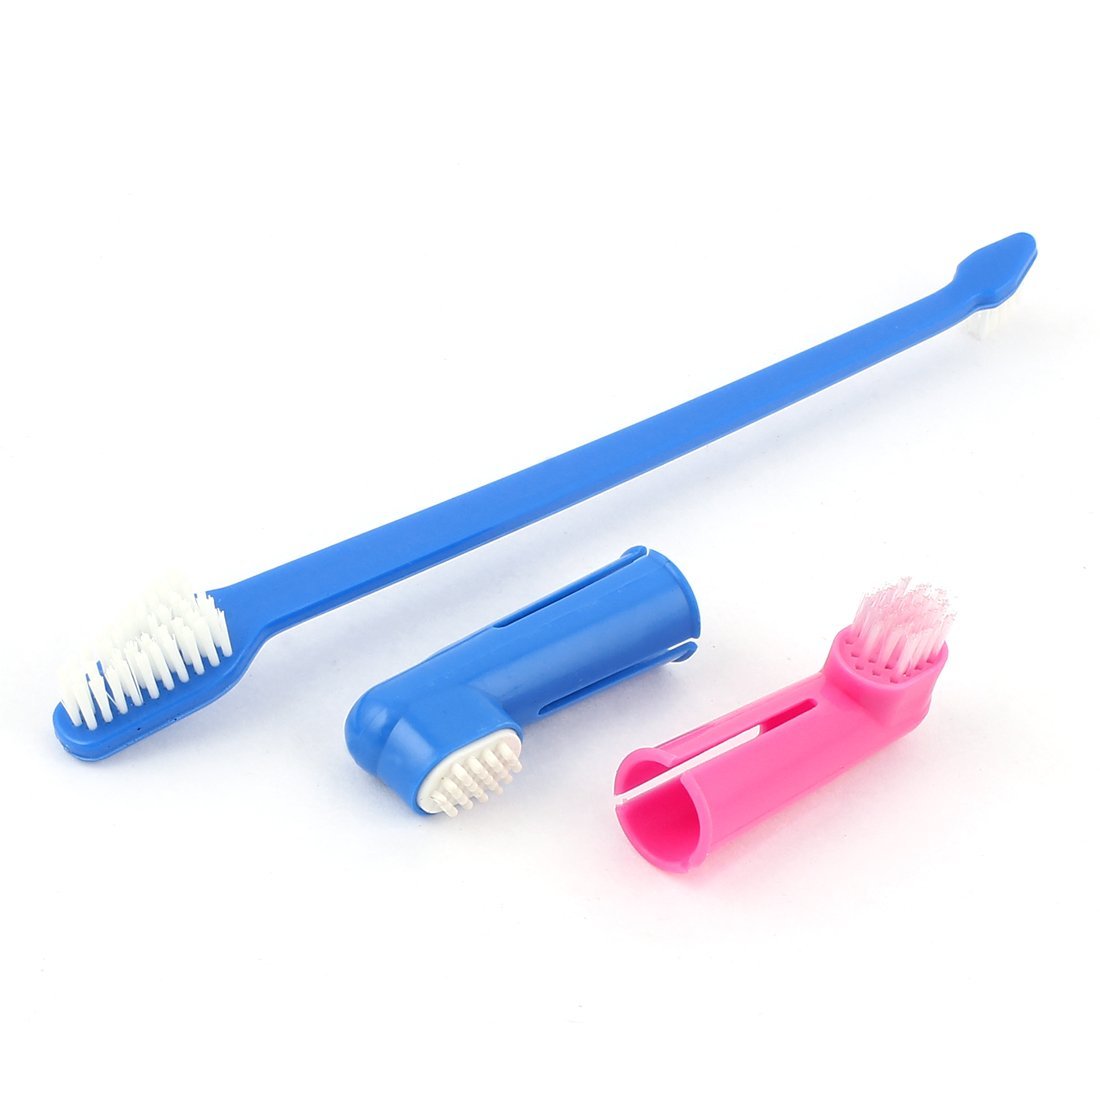 Cleaning Dental Toothbrush Set of 3 with 1 Double Headed Toothbrush